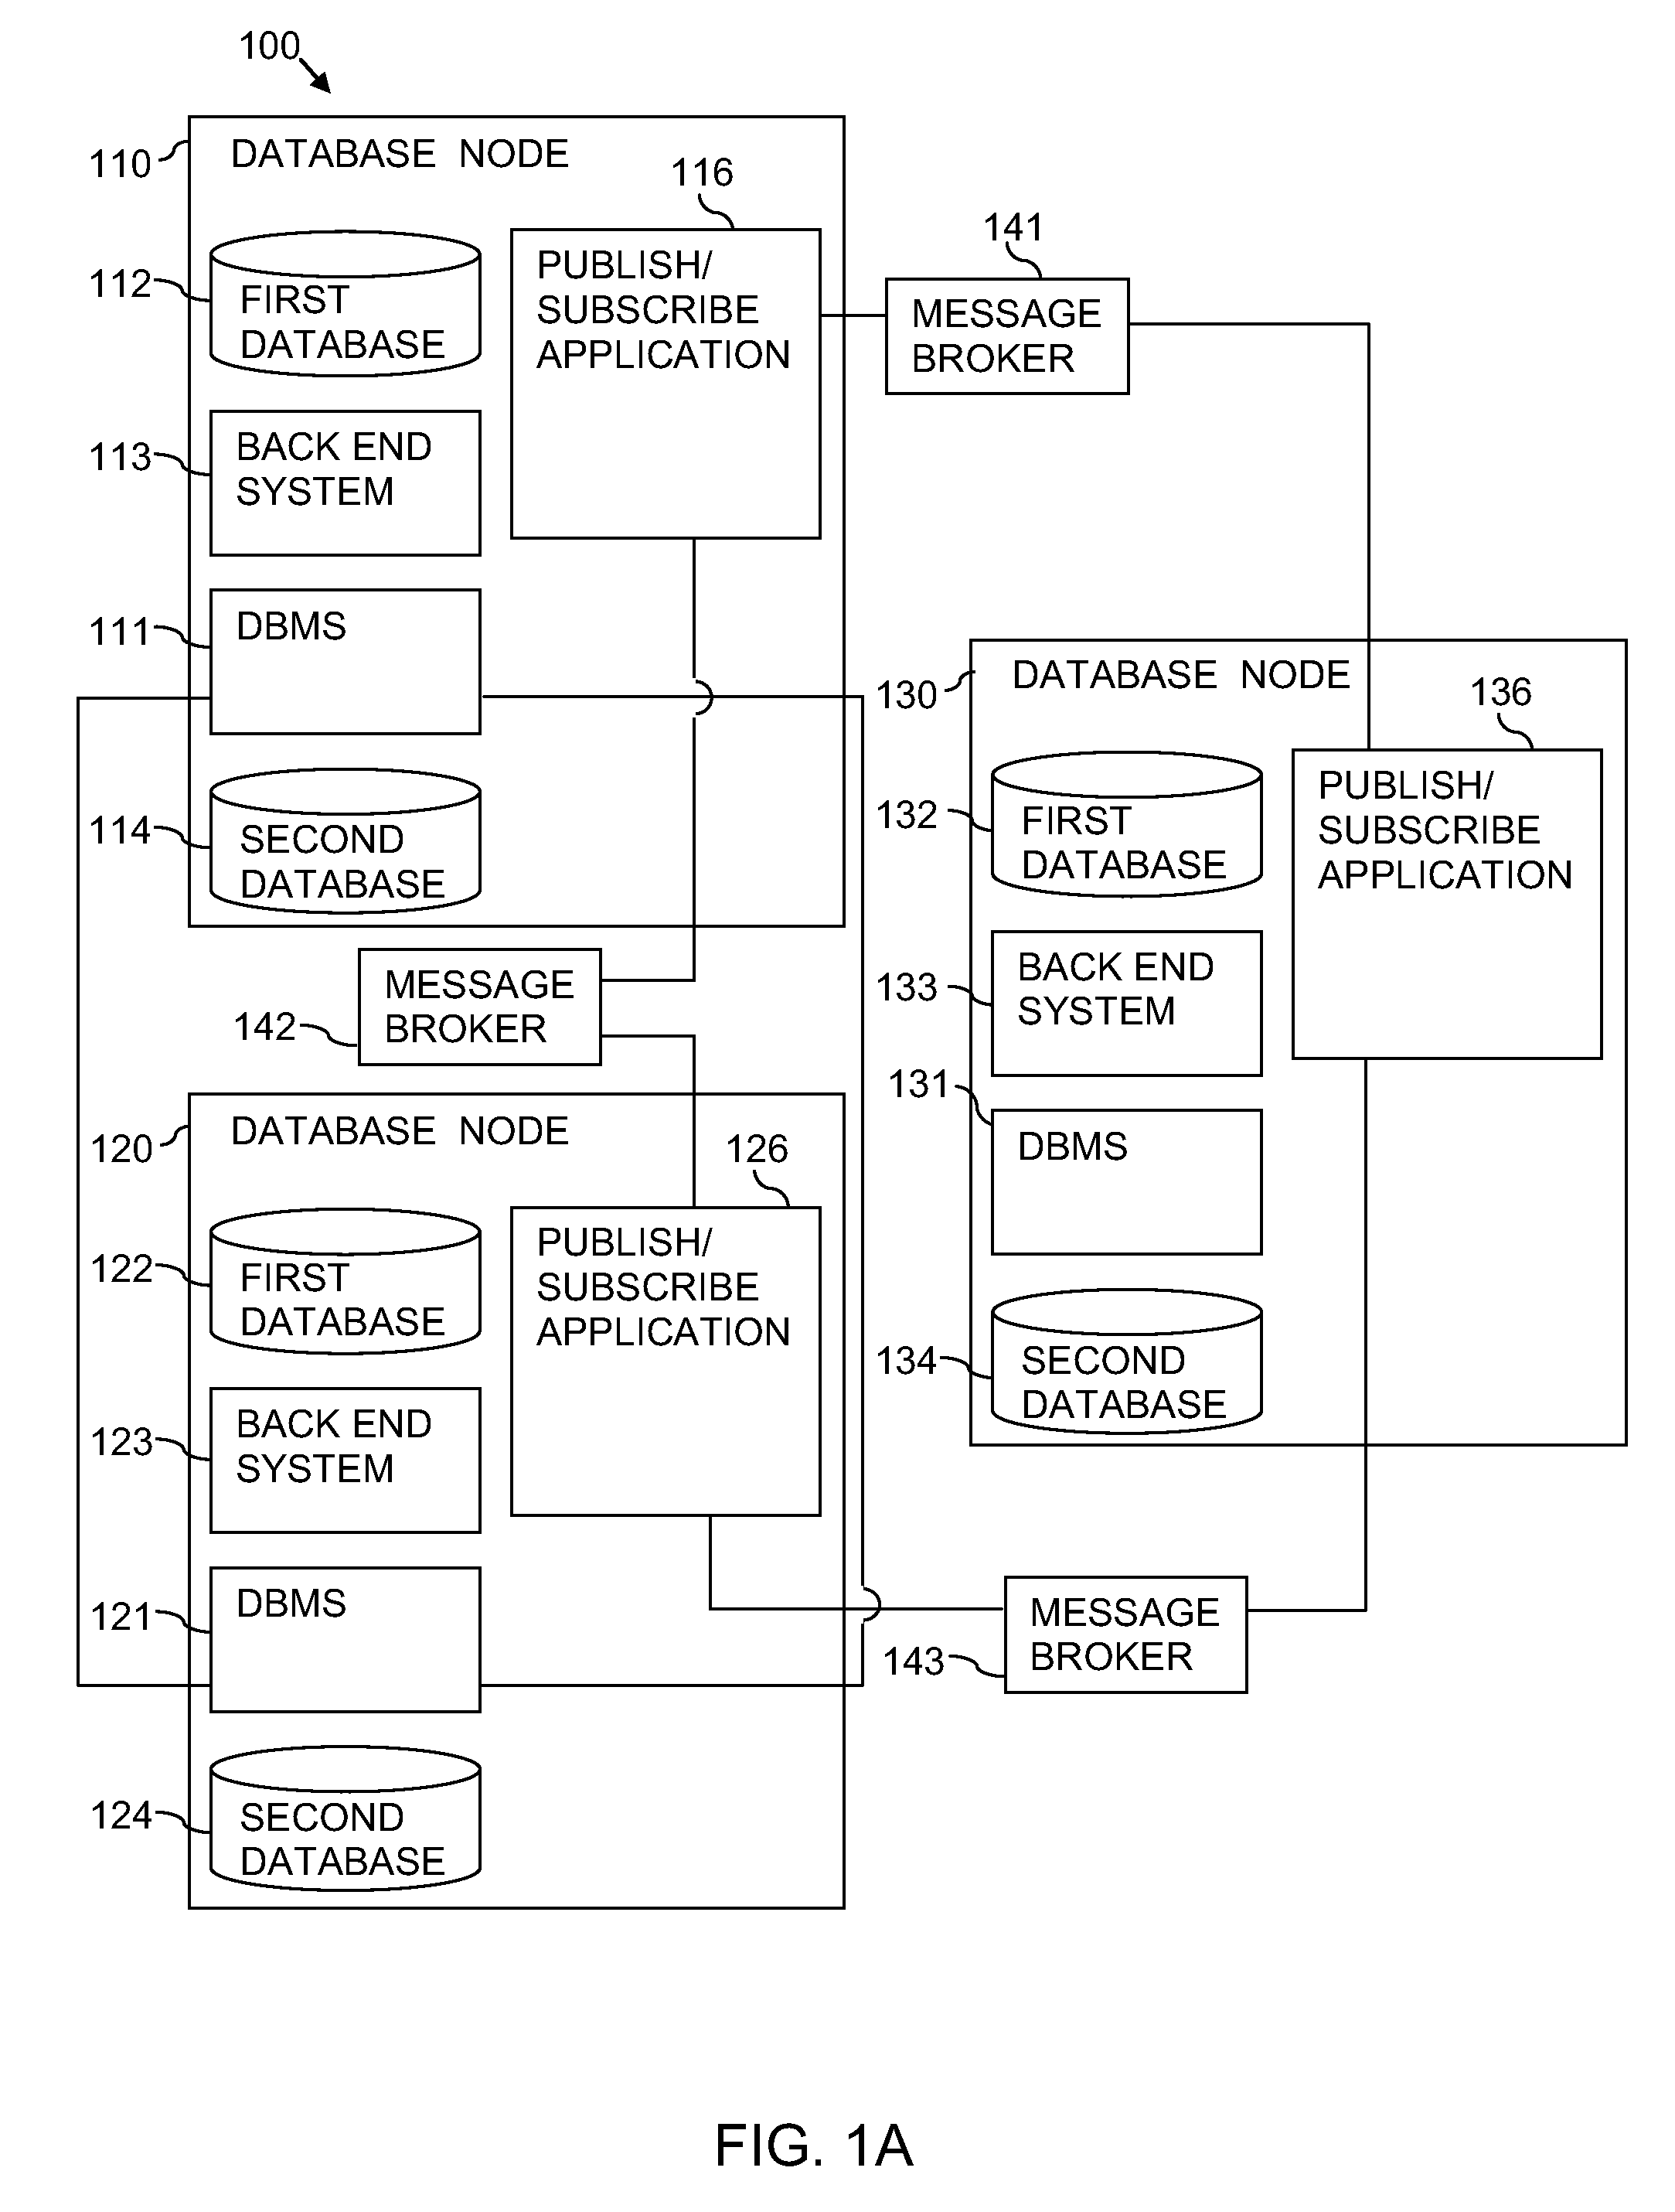 Persistent querying in a federated database system